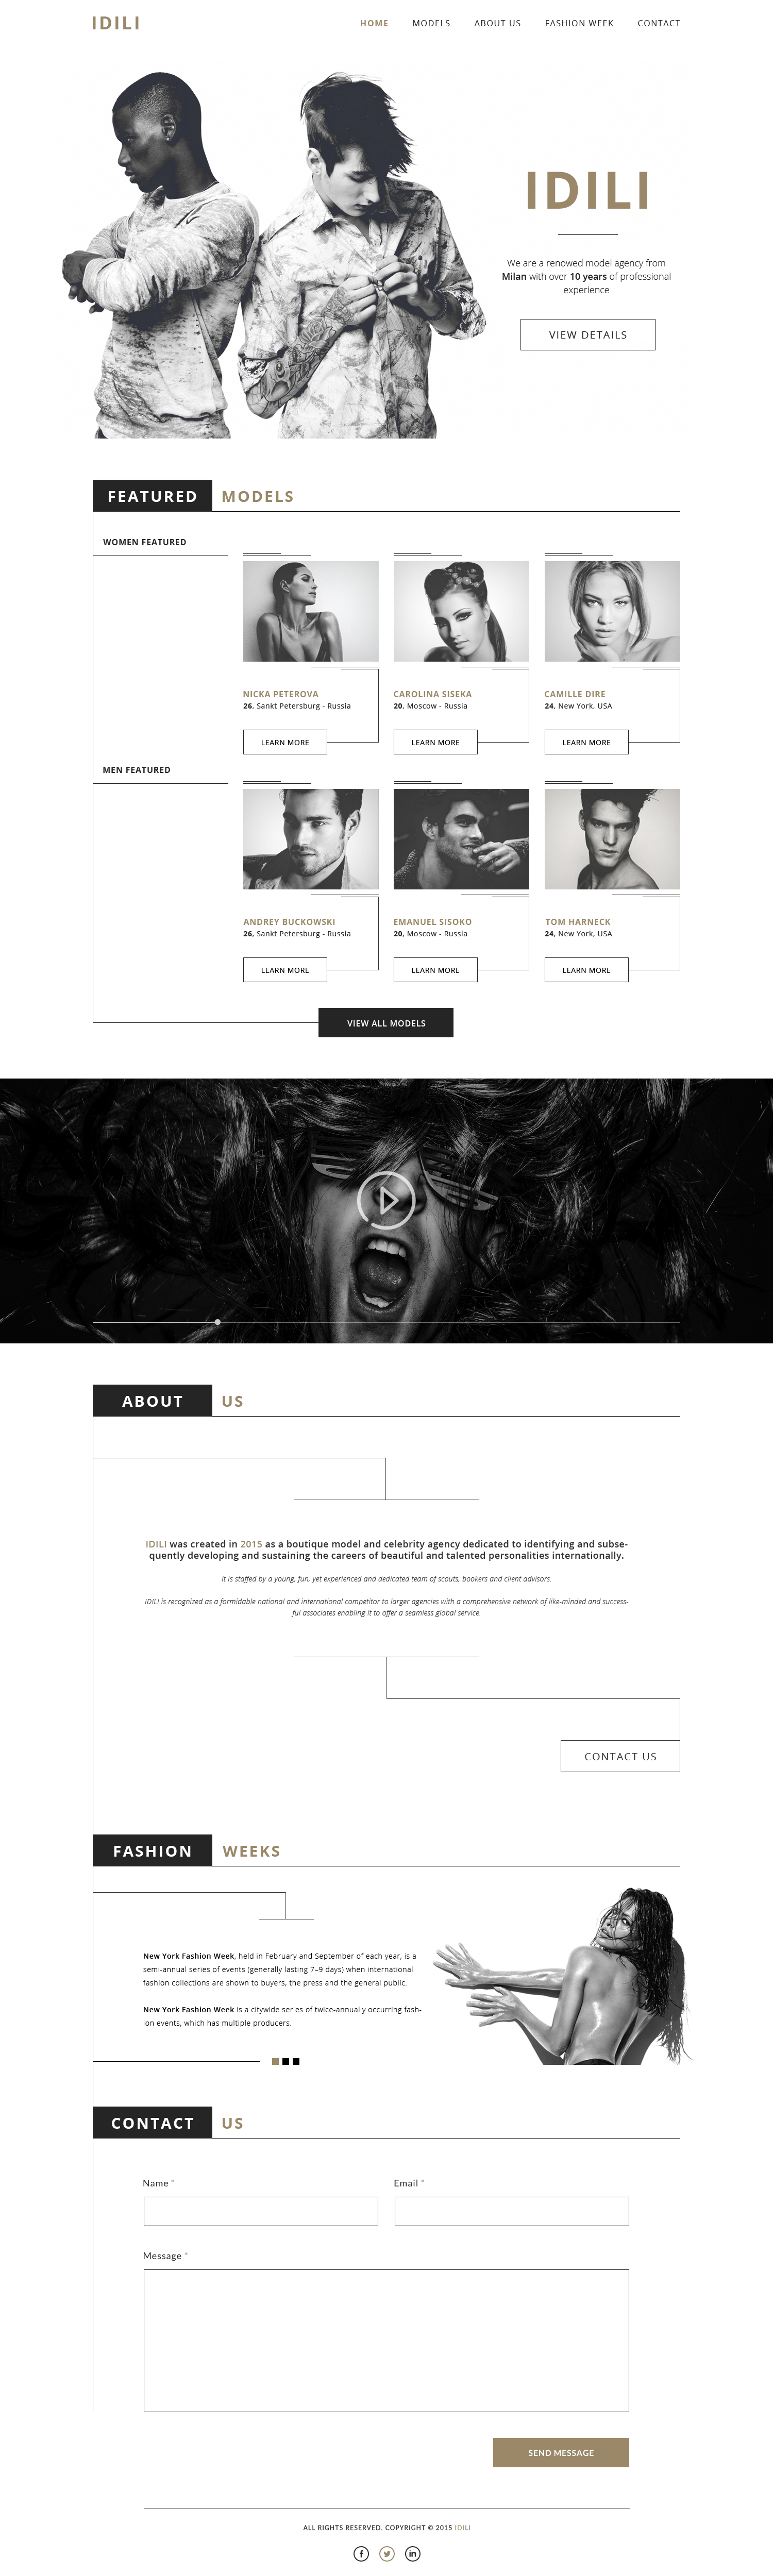 Free PSD Landing Page for Fashion or Agency Websites